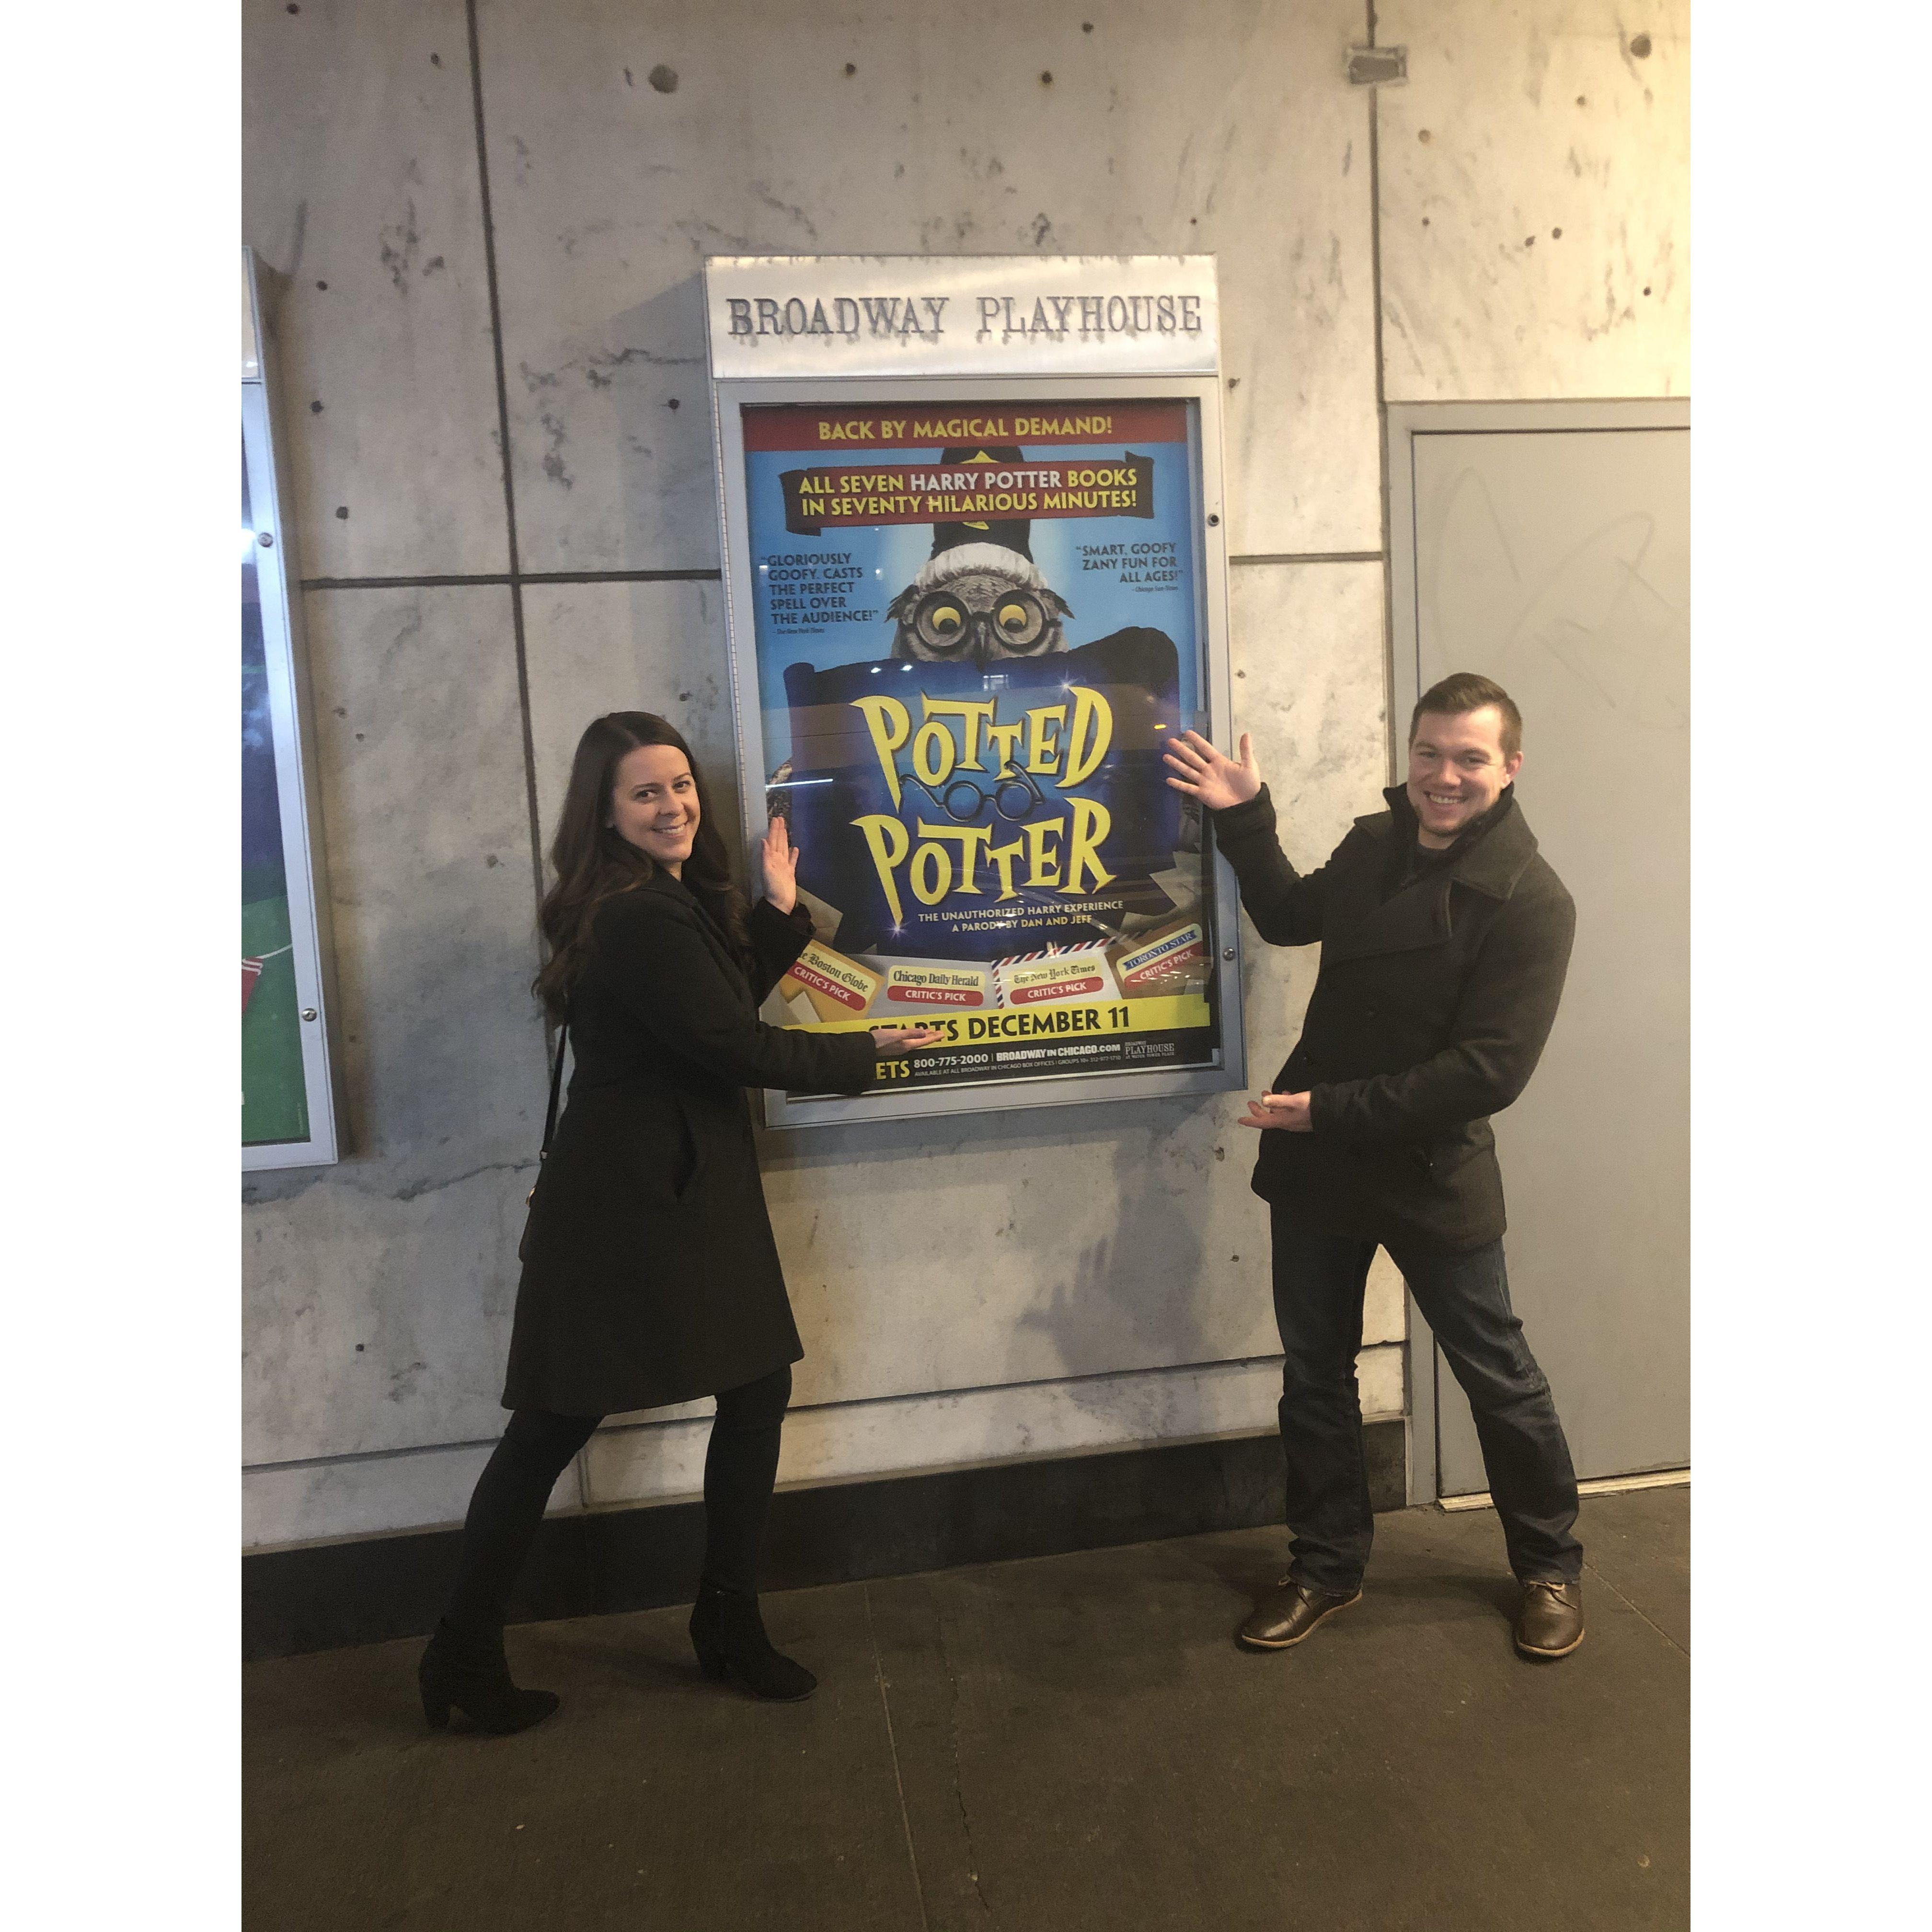 Chicago trip with Josh's parents - 3 months into dating. We saw "Potted Potter" on Broadway. (2019)